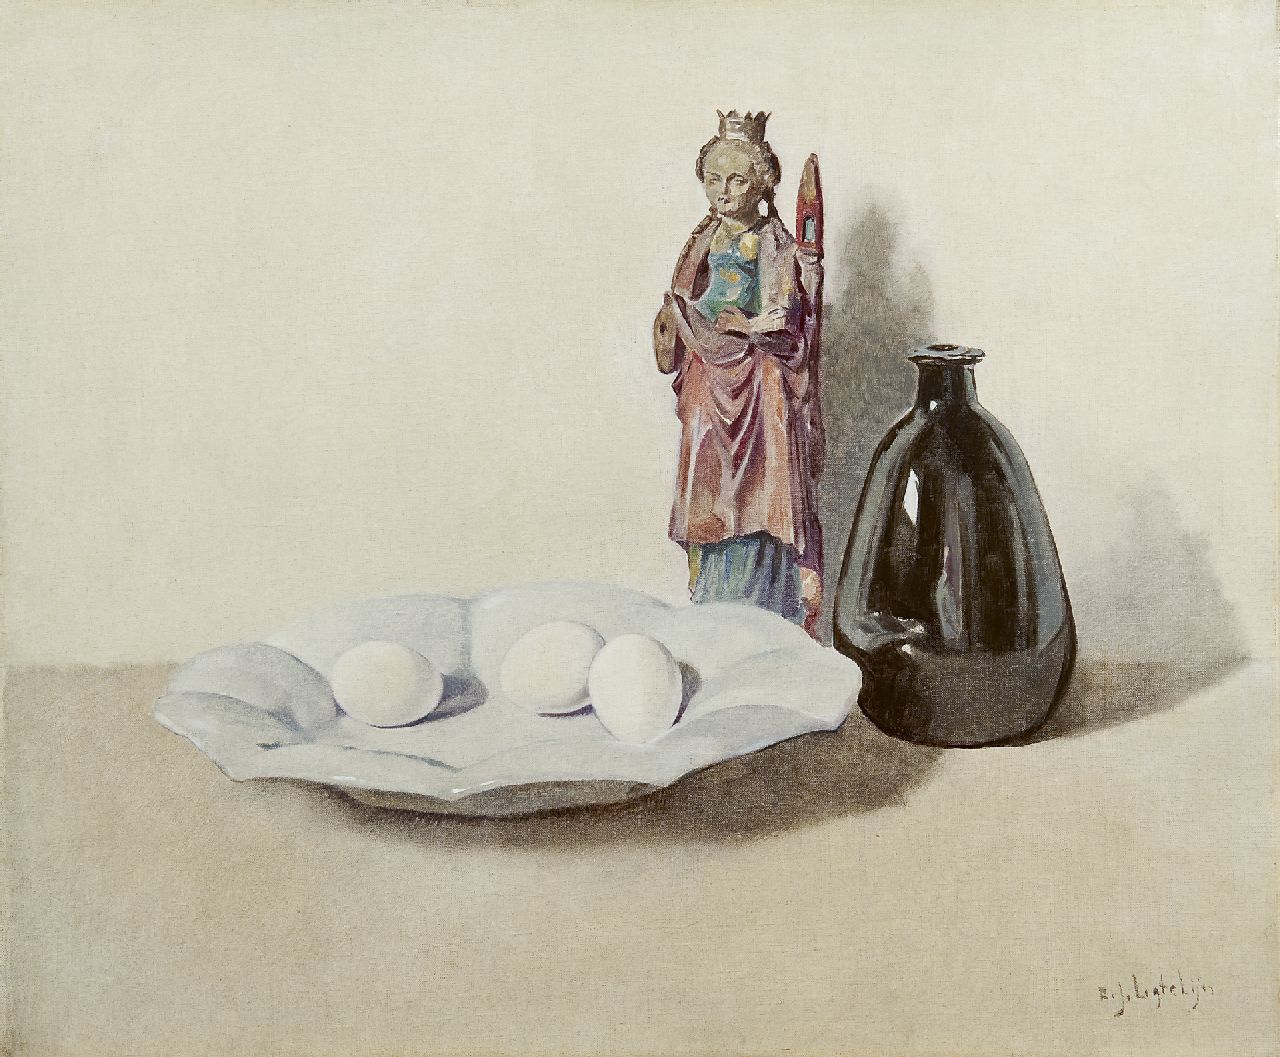 Ligtelijn E.J.  | Evert Jan Ligtelijn | Paintings offered for sale | A still life with eggs, sculpture and a vase, oil on canvas 50.2 x 60.0 cm, signed l.r.